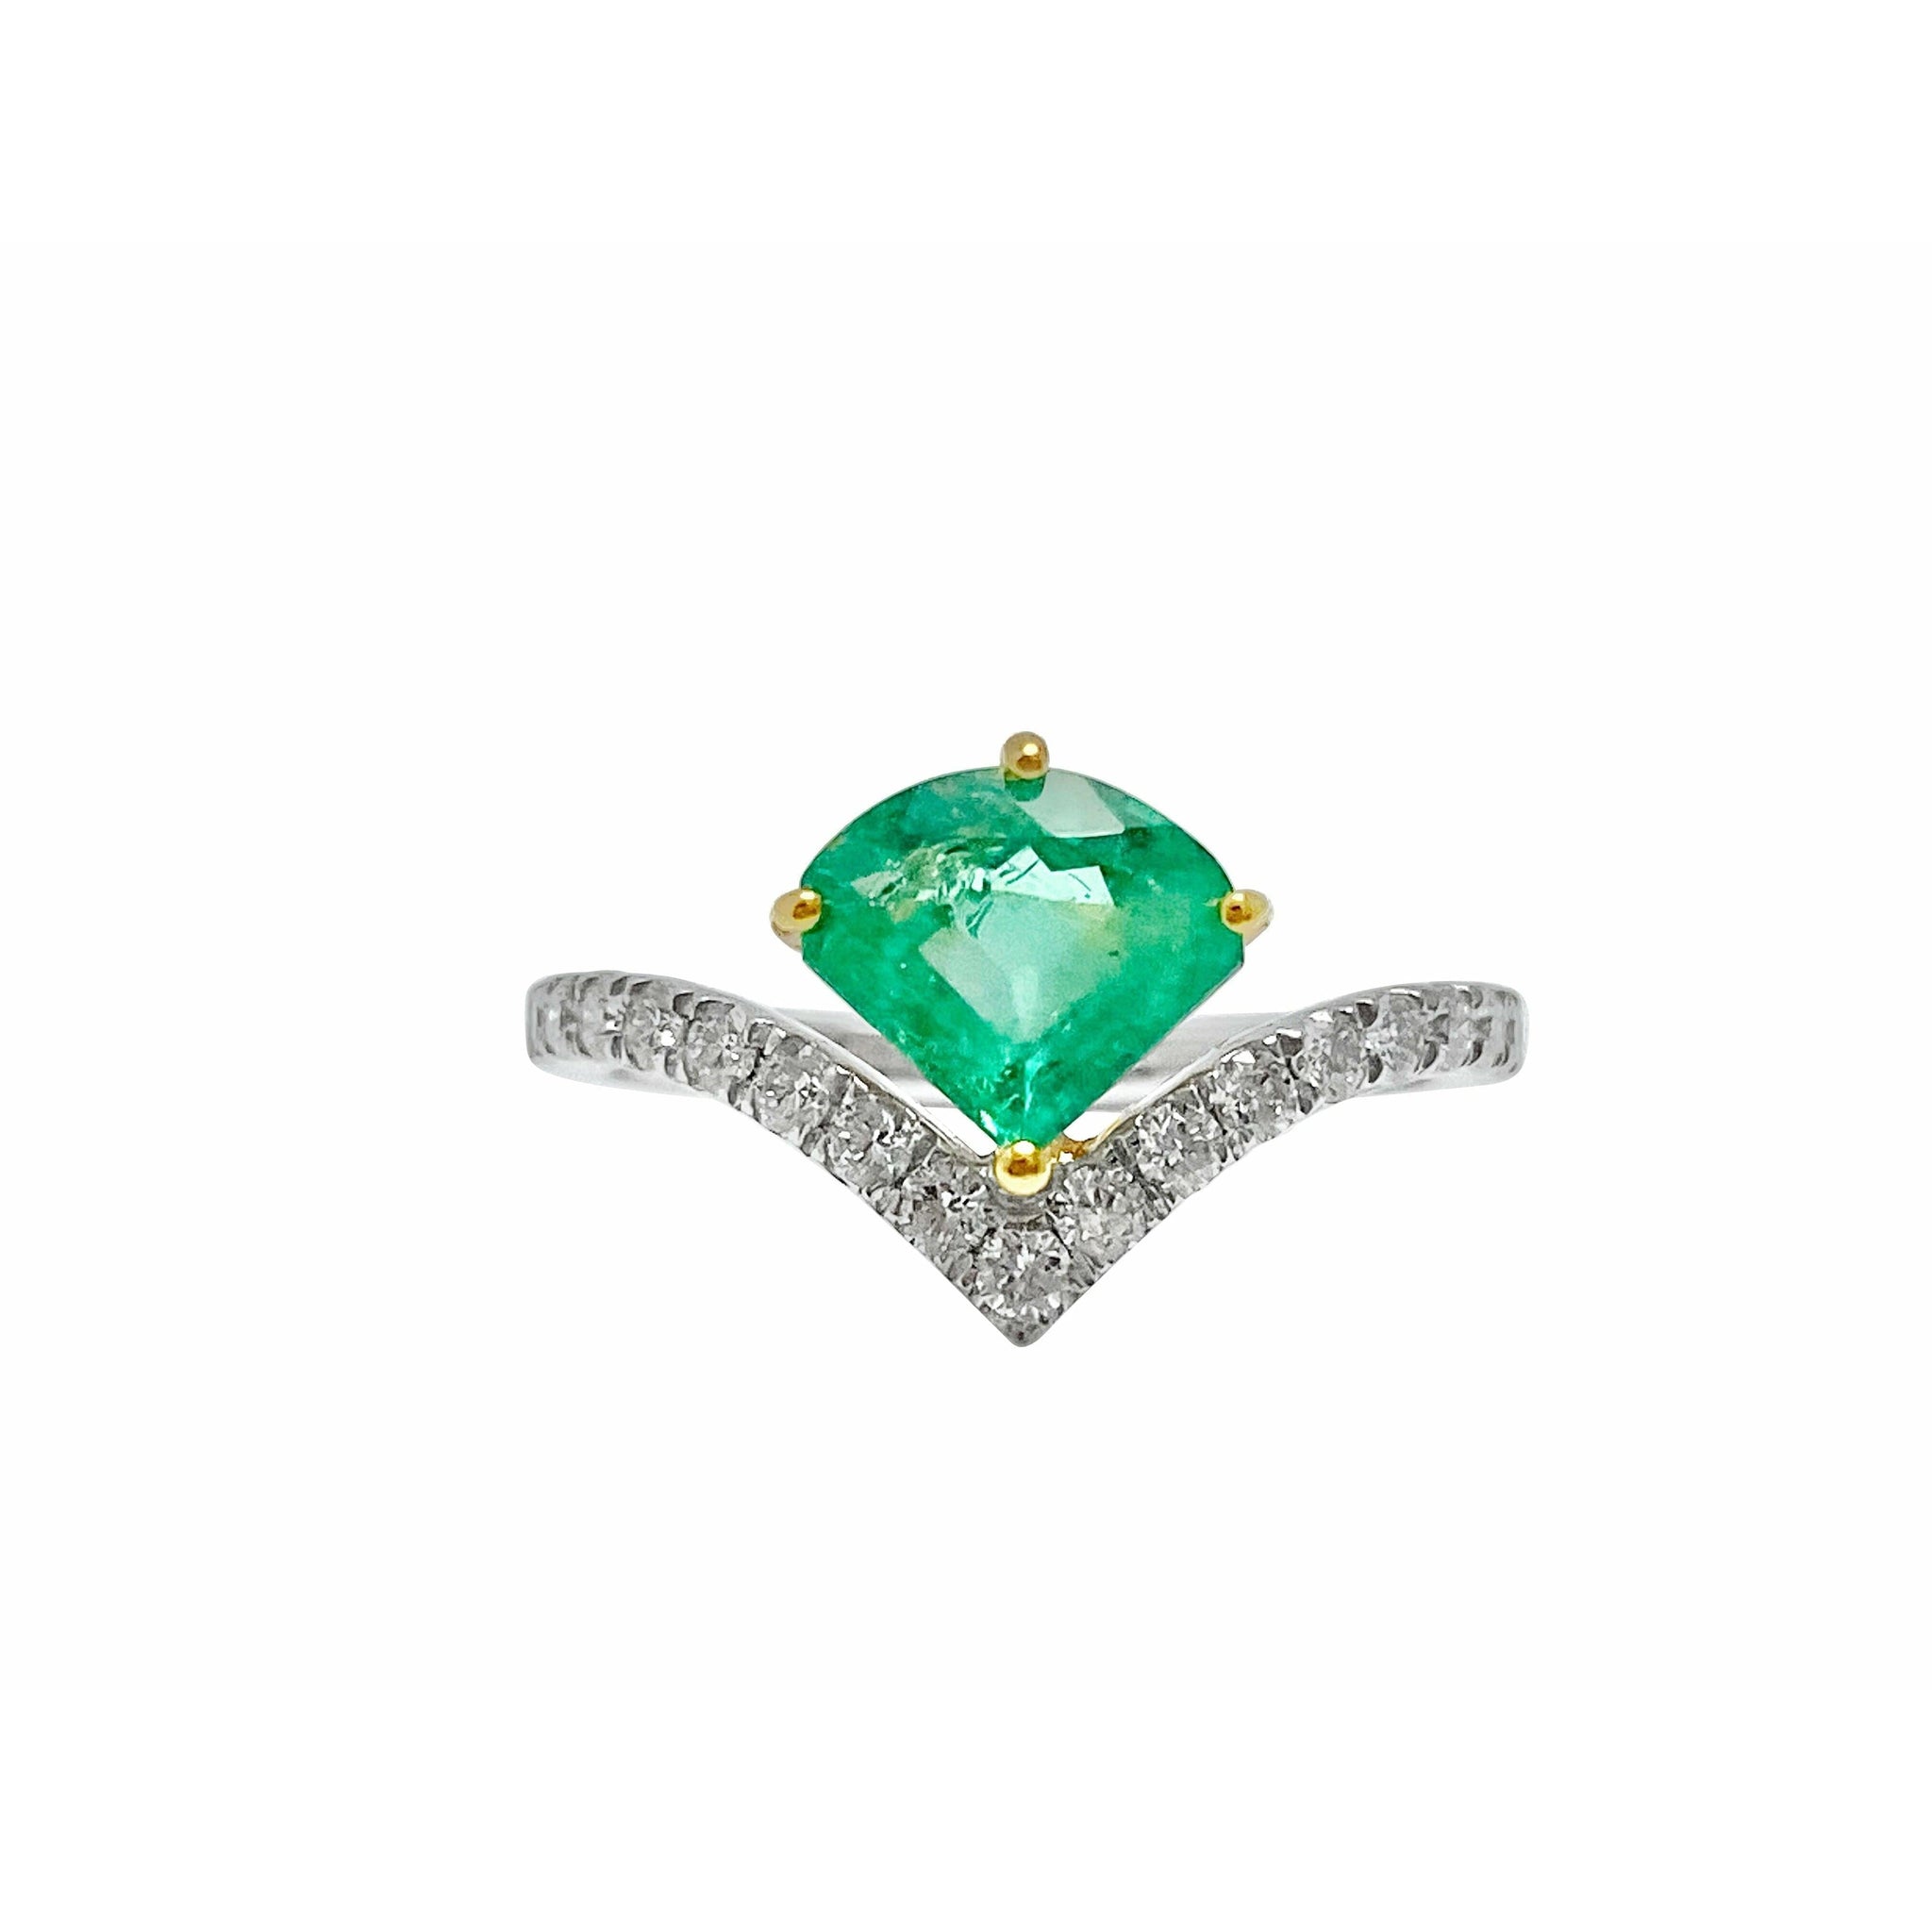 Fancy Cut Natural Colombian Emerald Ring 18k White gold - ASSAY